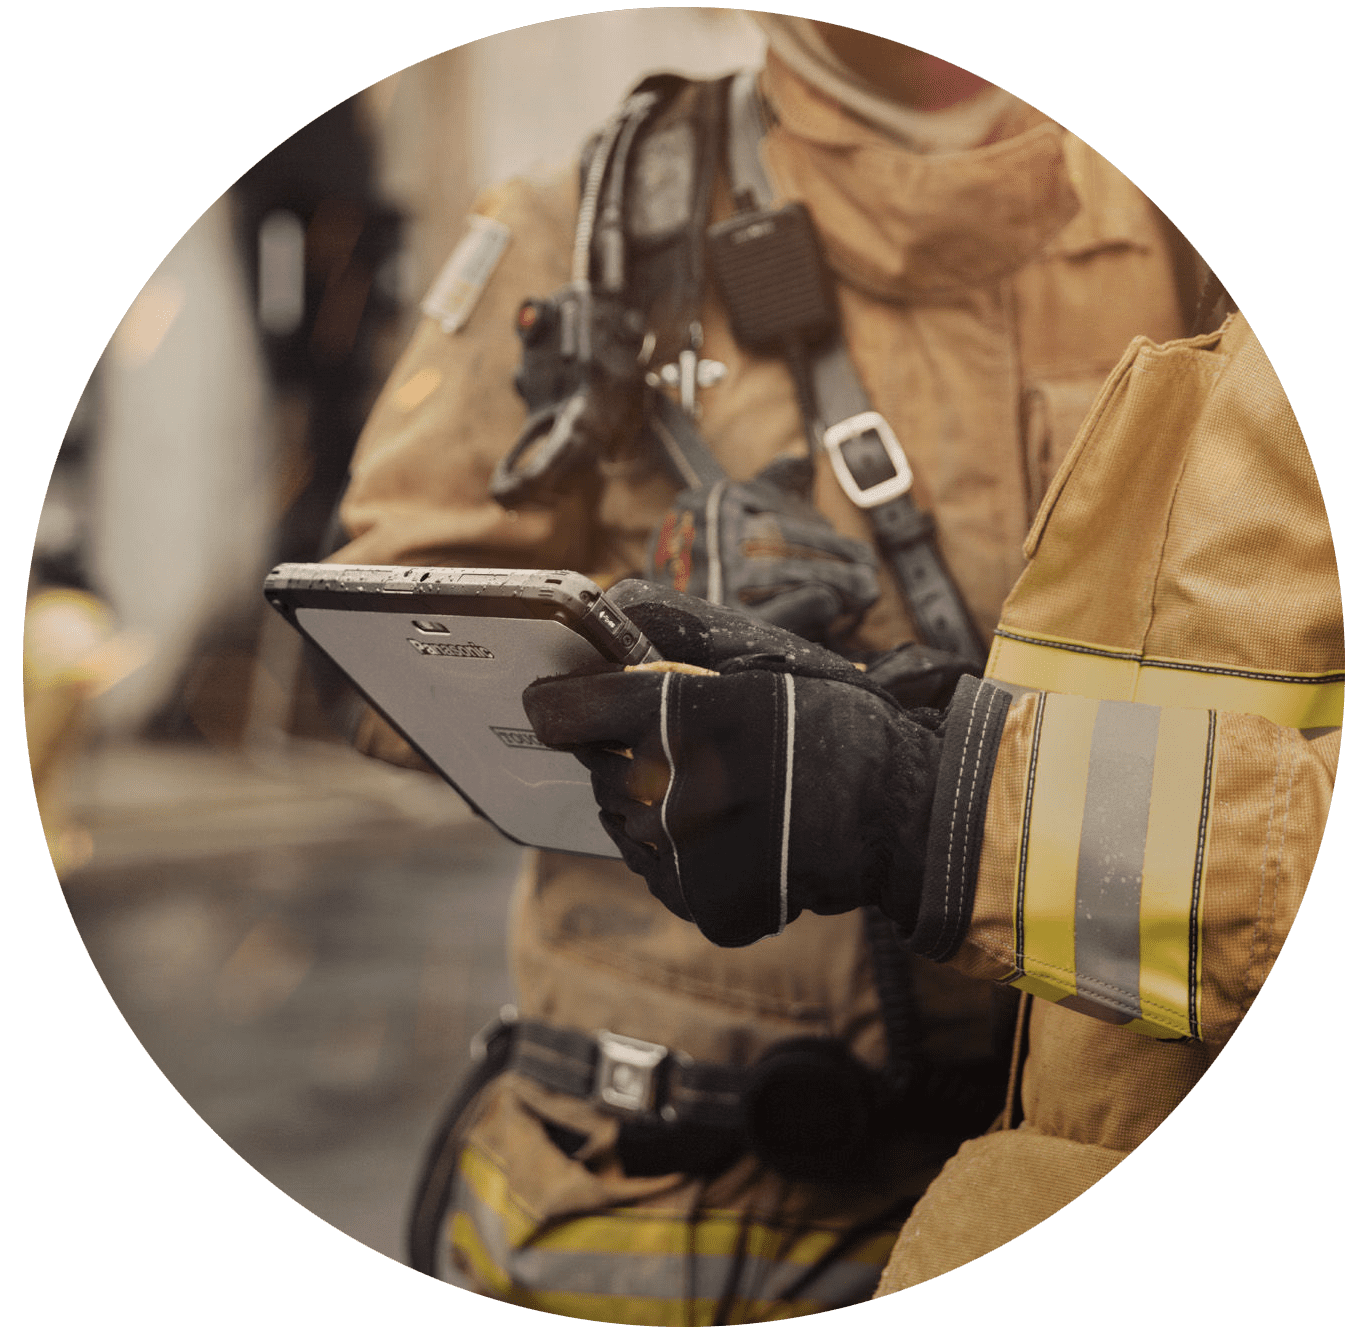 Panasonic TOUGHBOOK rugged tablet firefighter